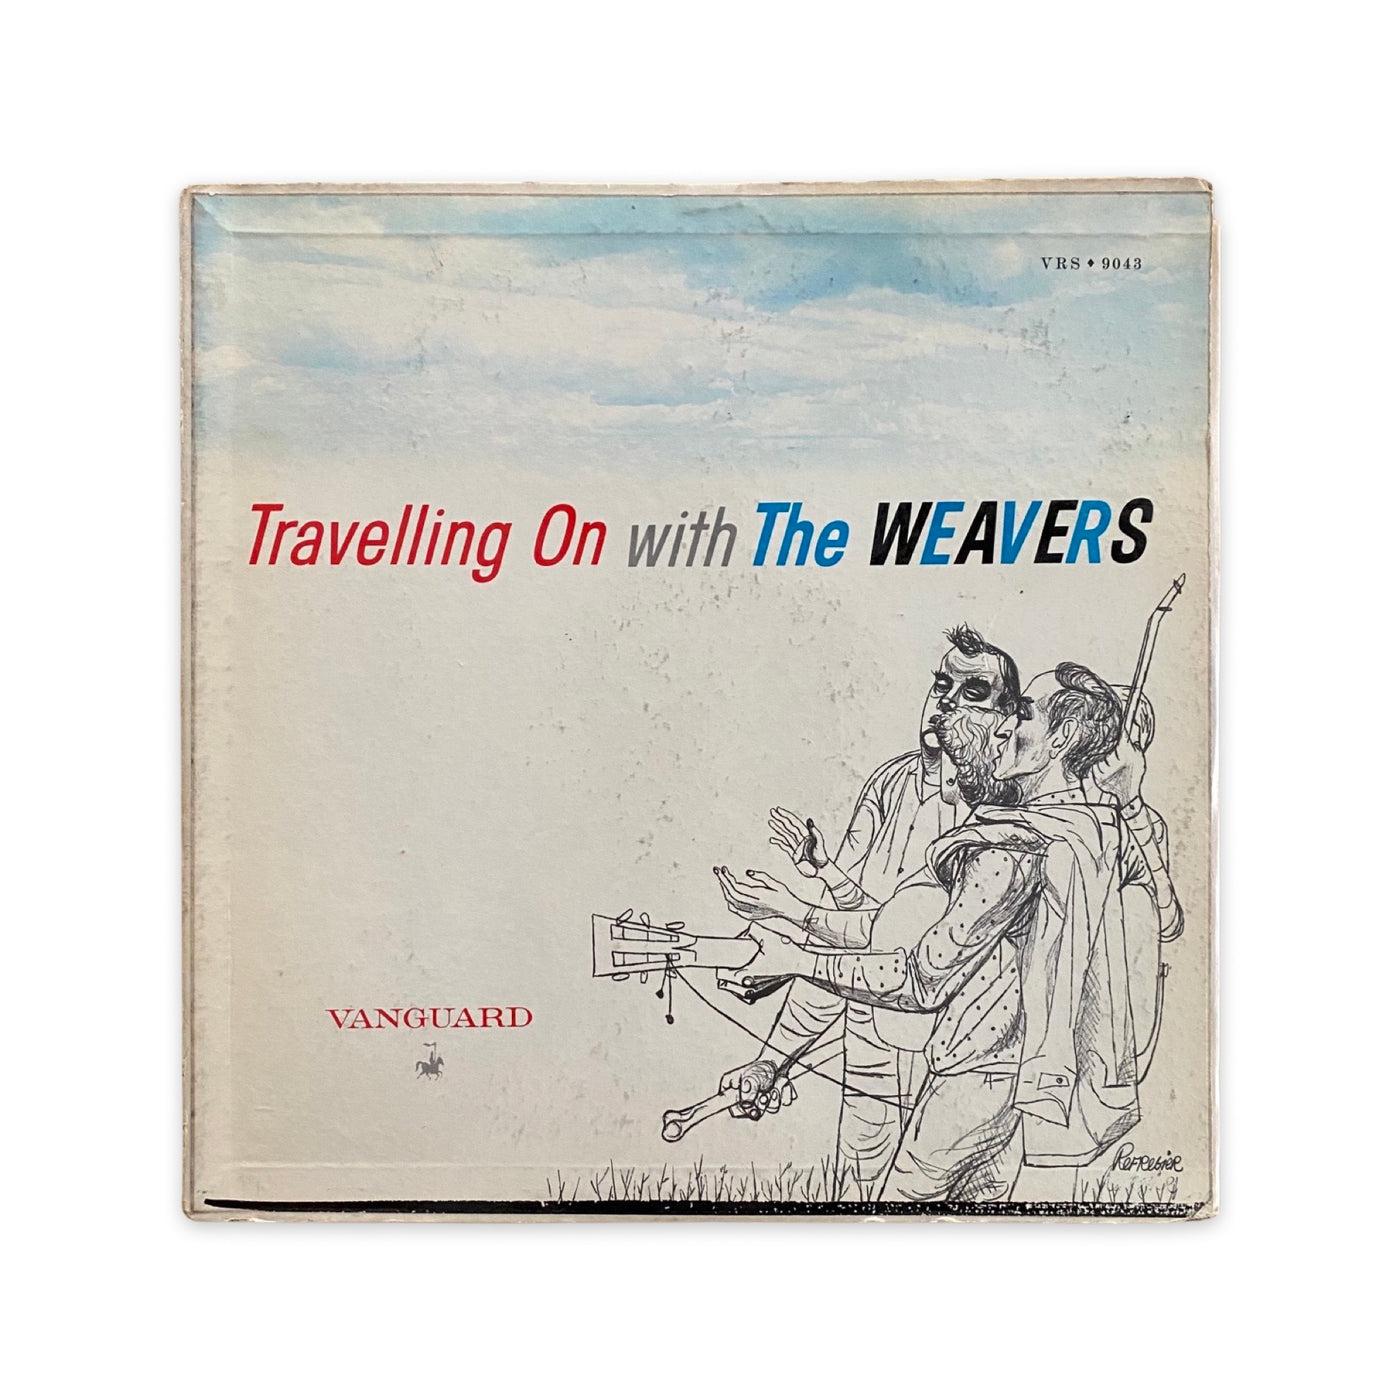 The Weavers - Travelling On With The Weavers